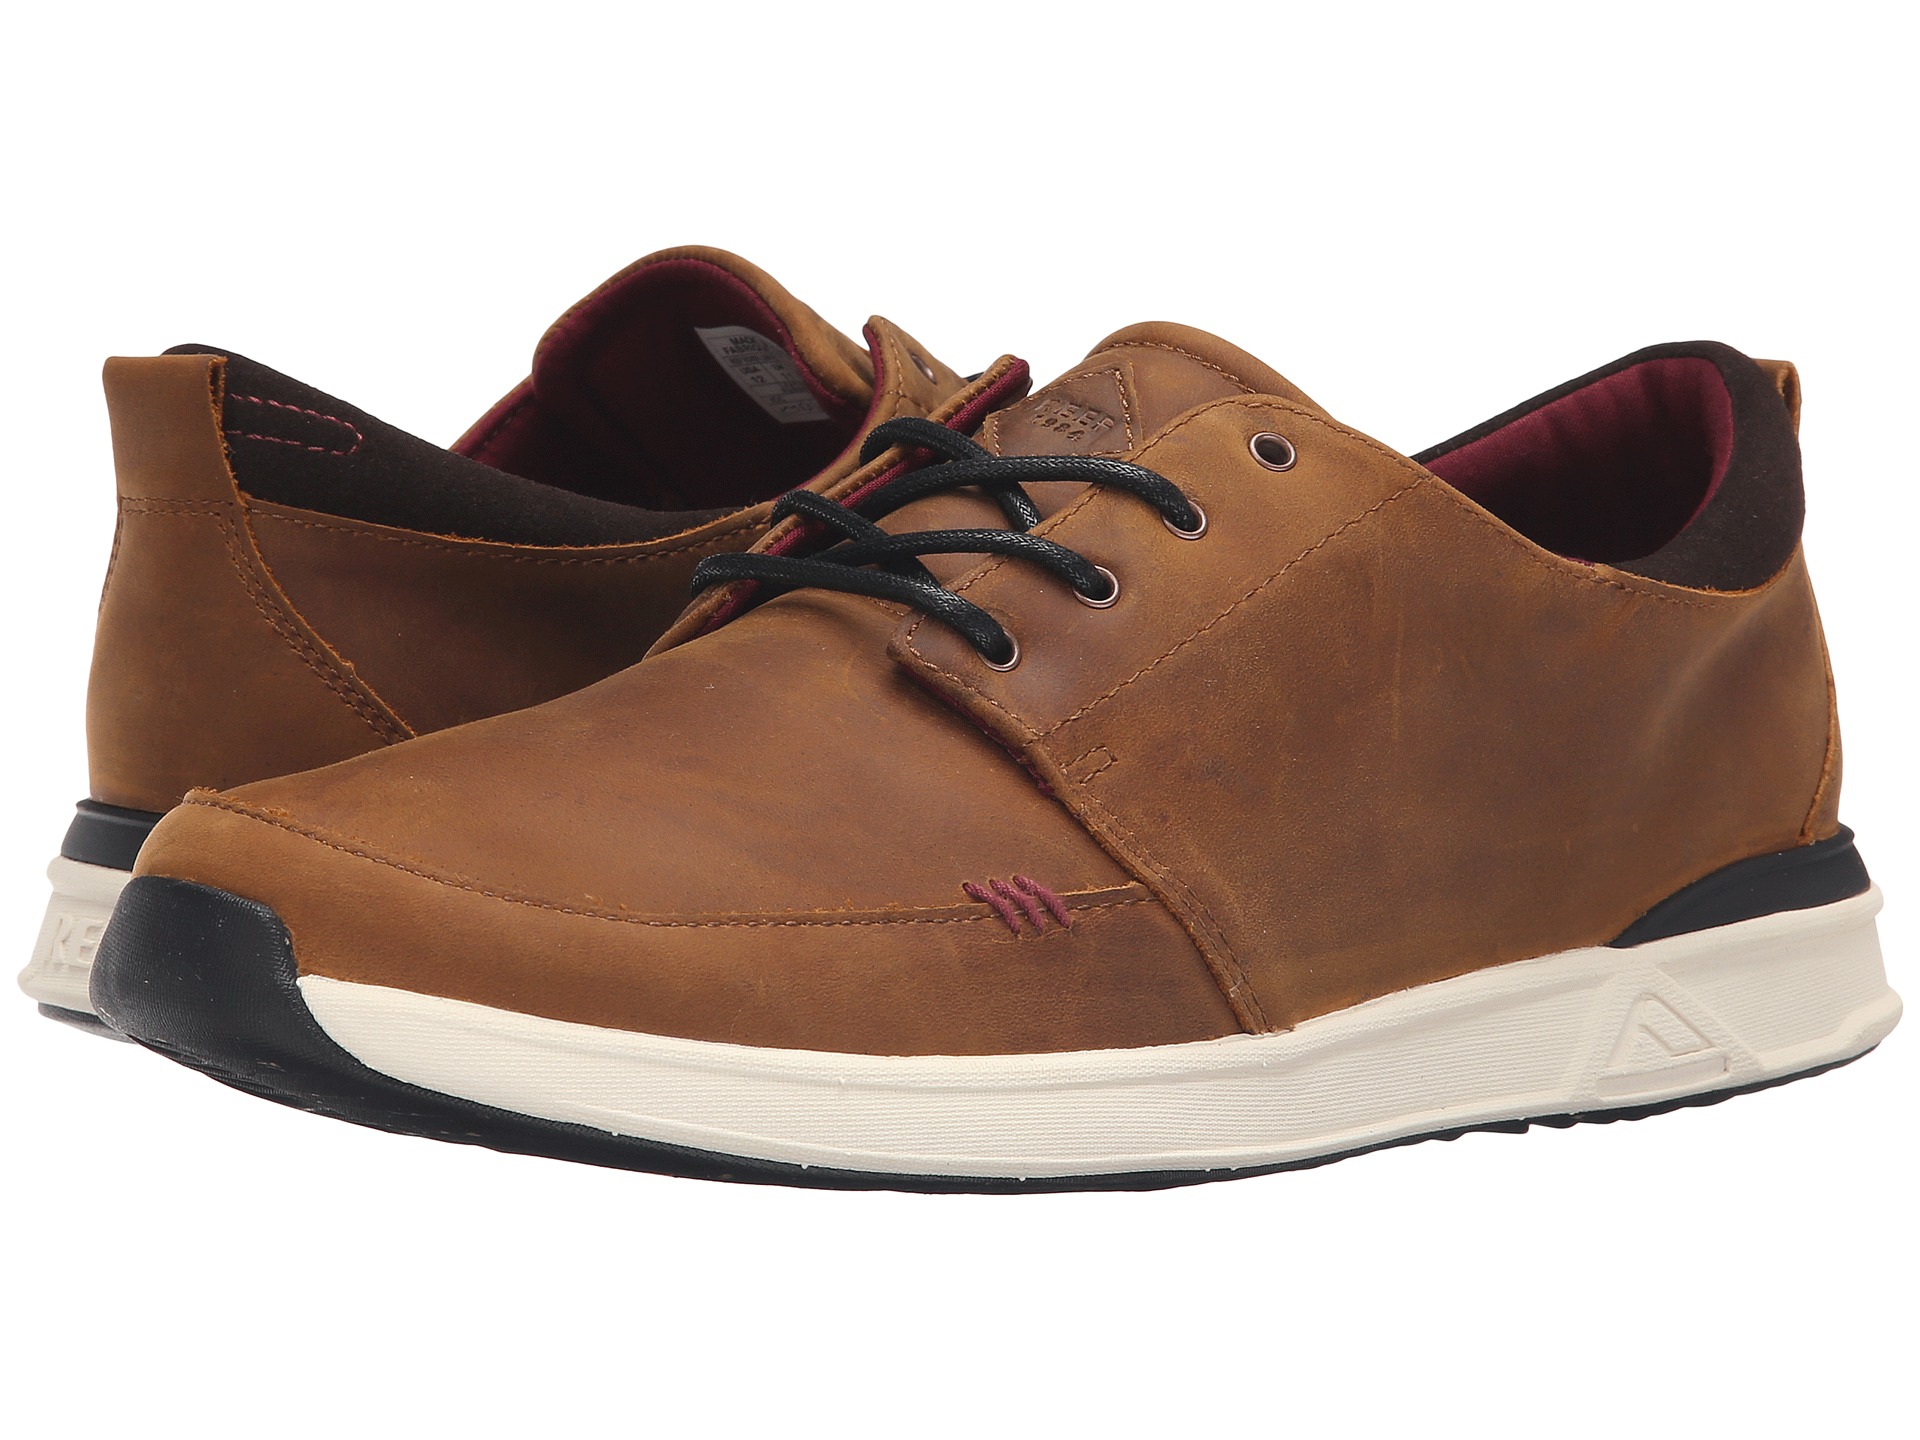 Reef Rover Low FGL Brown - Zappos.com Free Shipping BOTH Ways